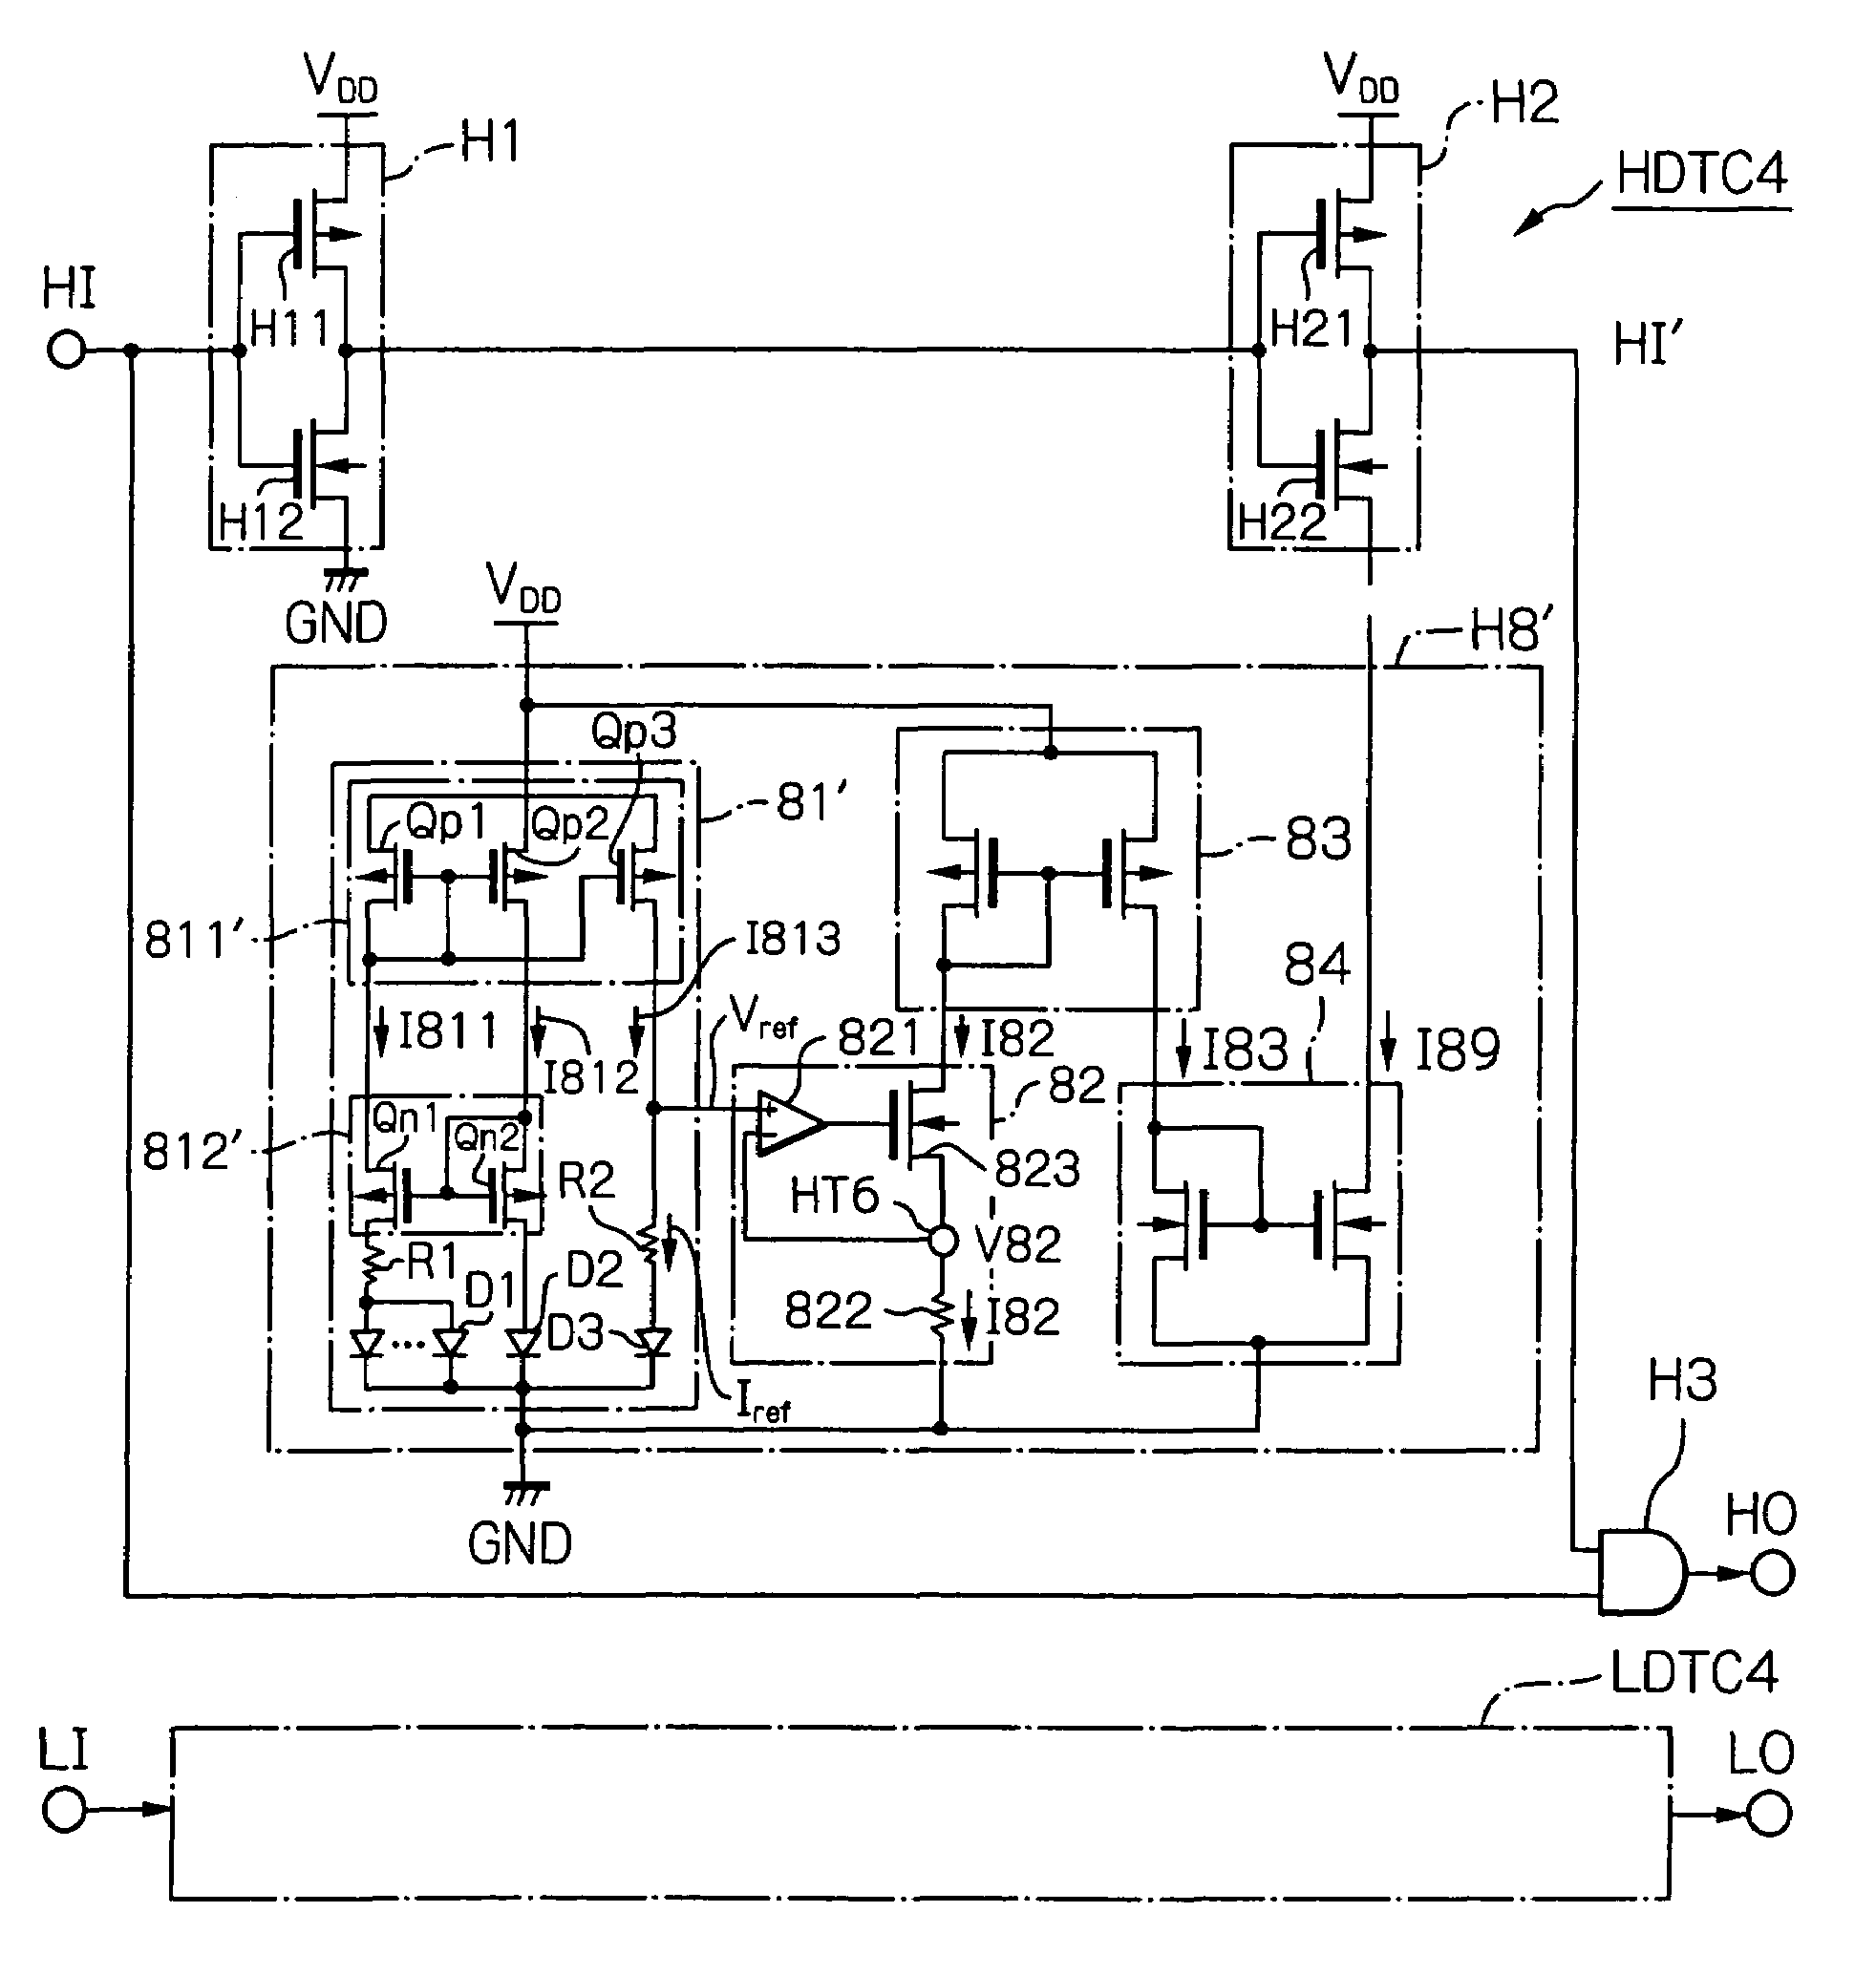 Dead time control circuit capable of adjusting temperature characteristics of dead time